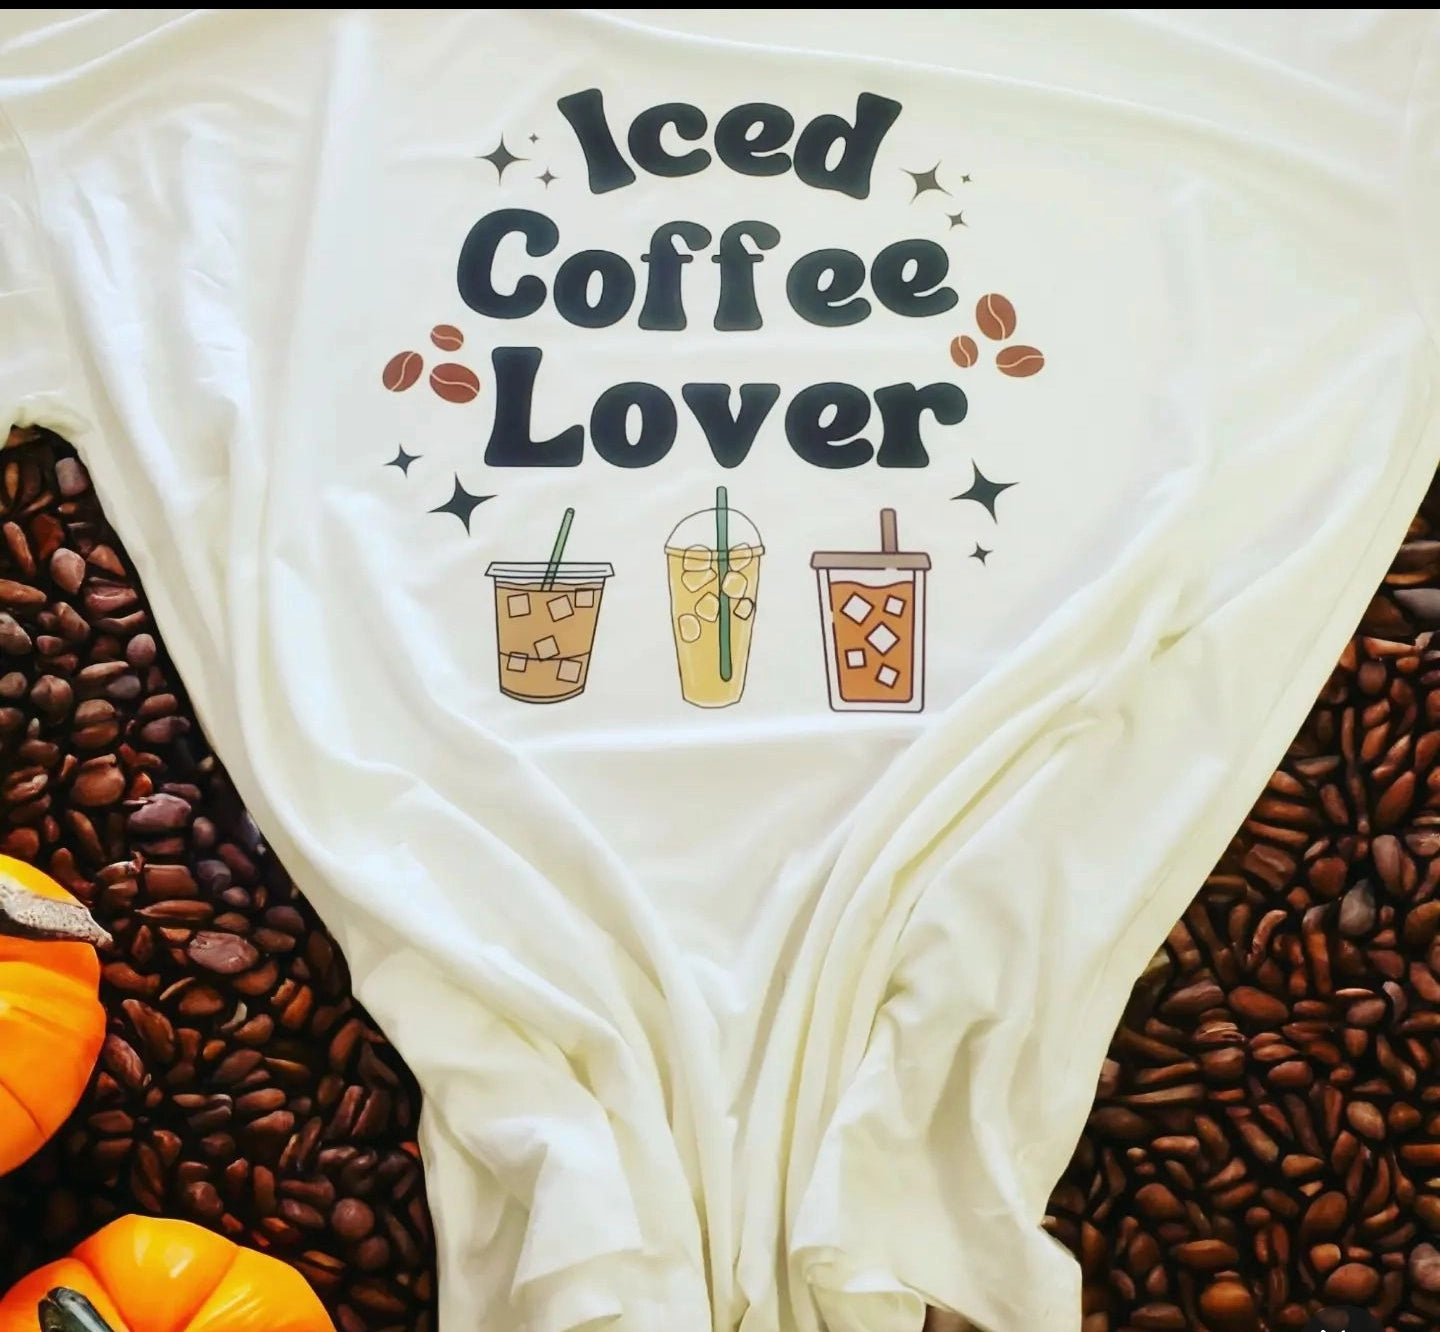 Iced Coffee Lover t-shirt with graphic